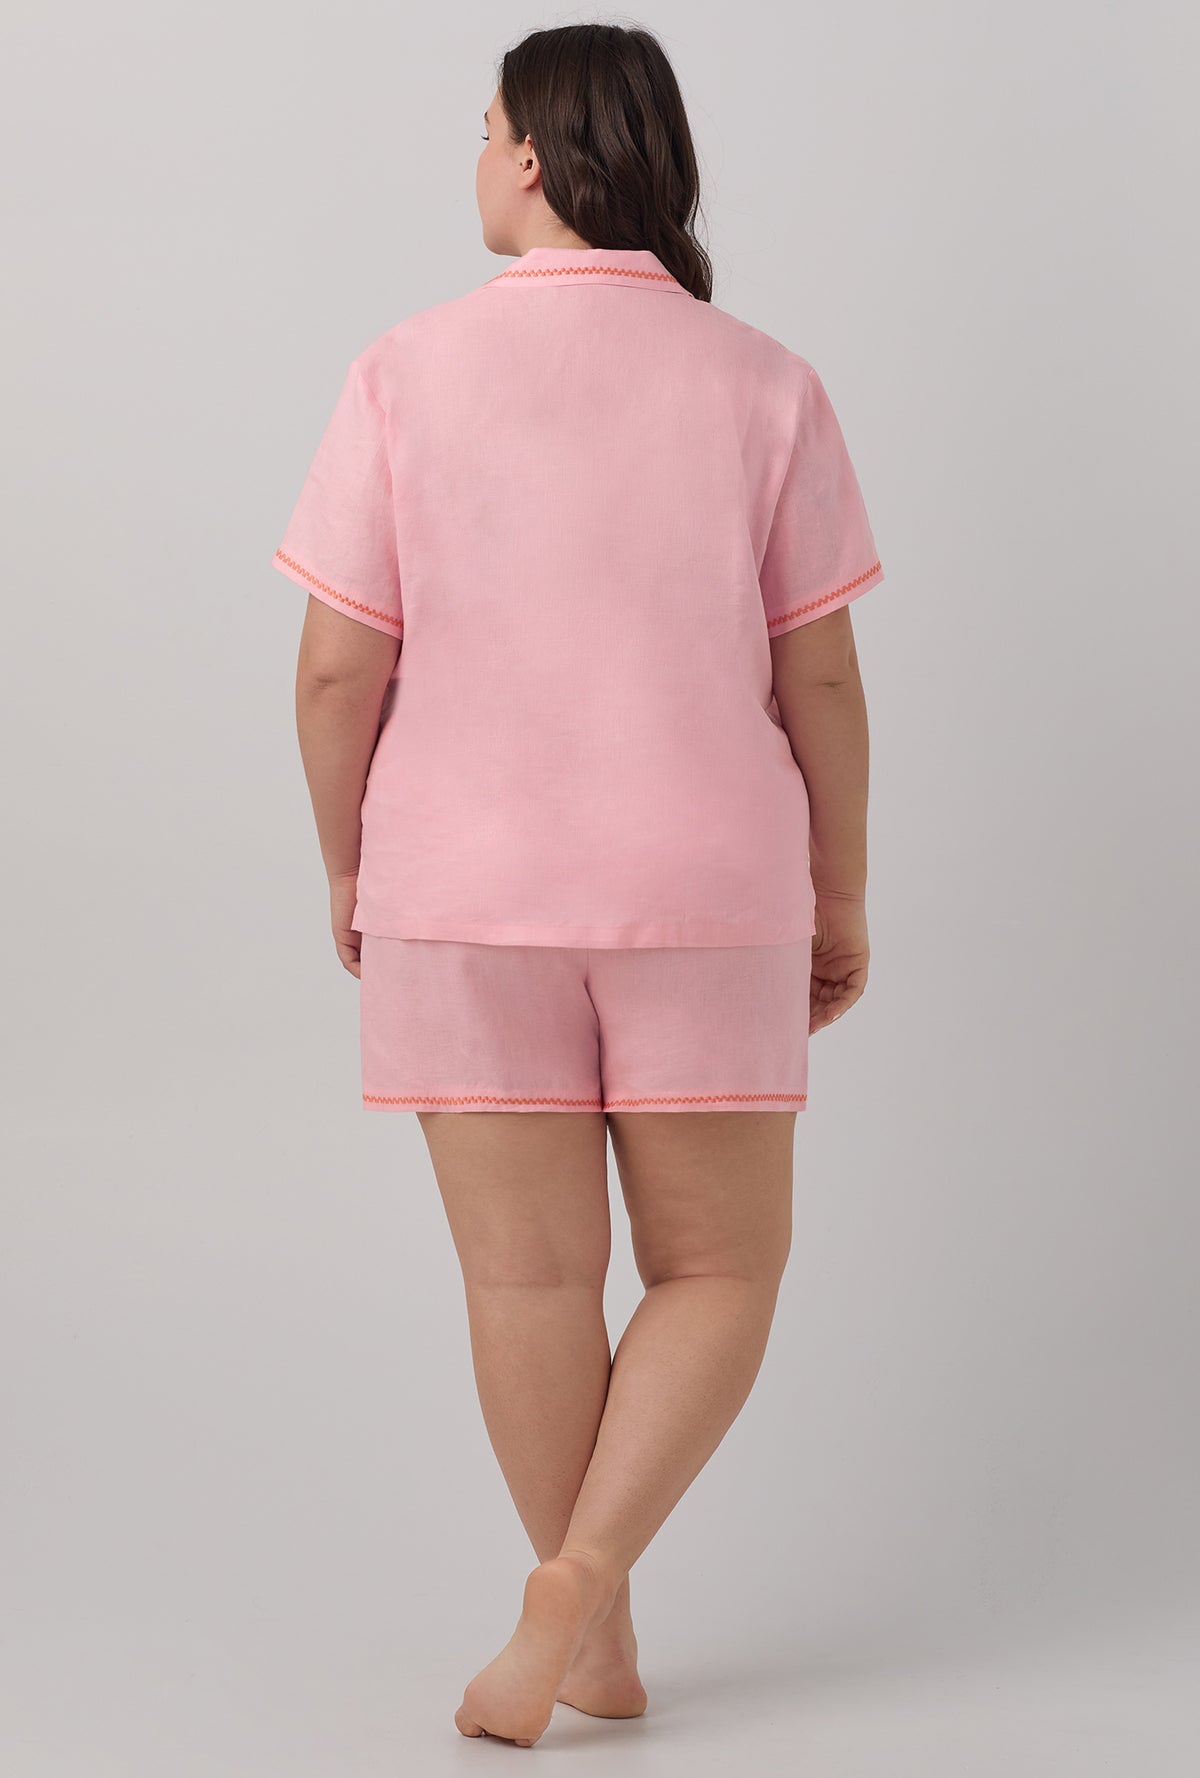 A lady wearing  plus size pink Short Sleeve Classic Shorty Woven Linen PJ Set with Orchid Pink print.